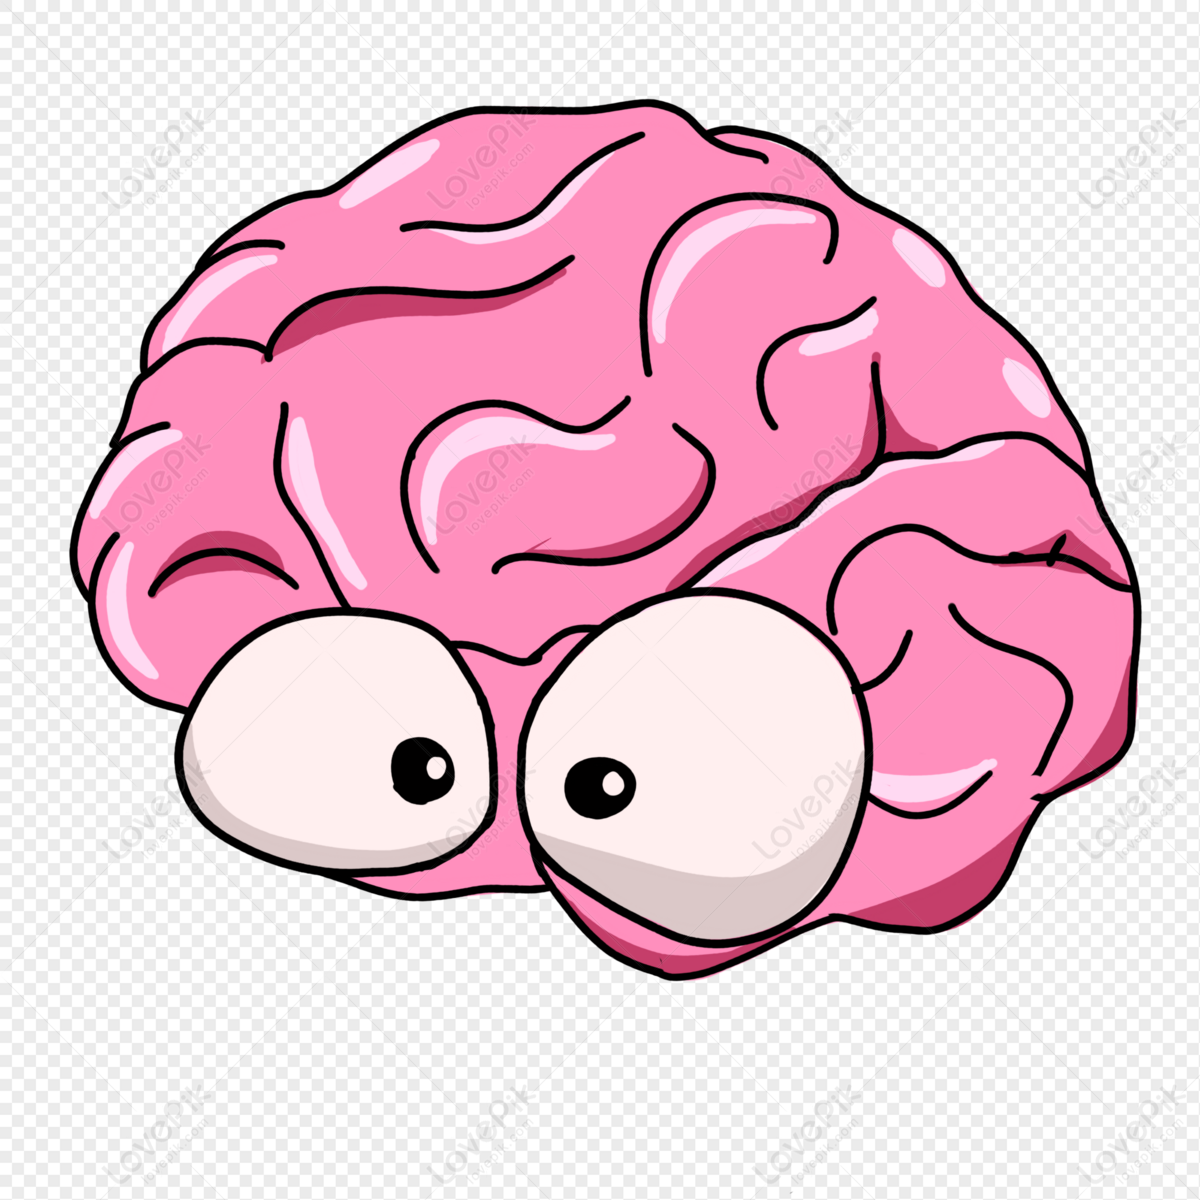 Cartoon Brain Images, HD Pictures For Free Vectors Download 